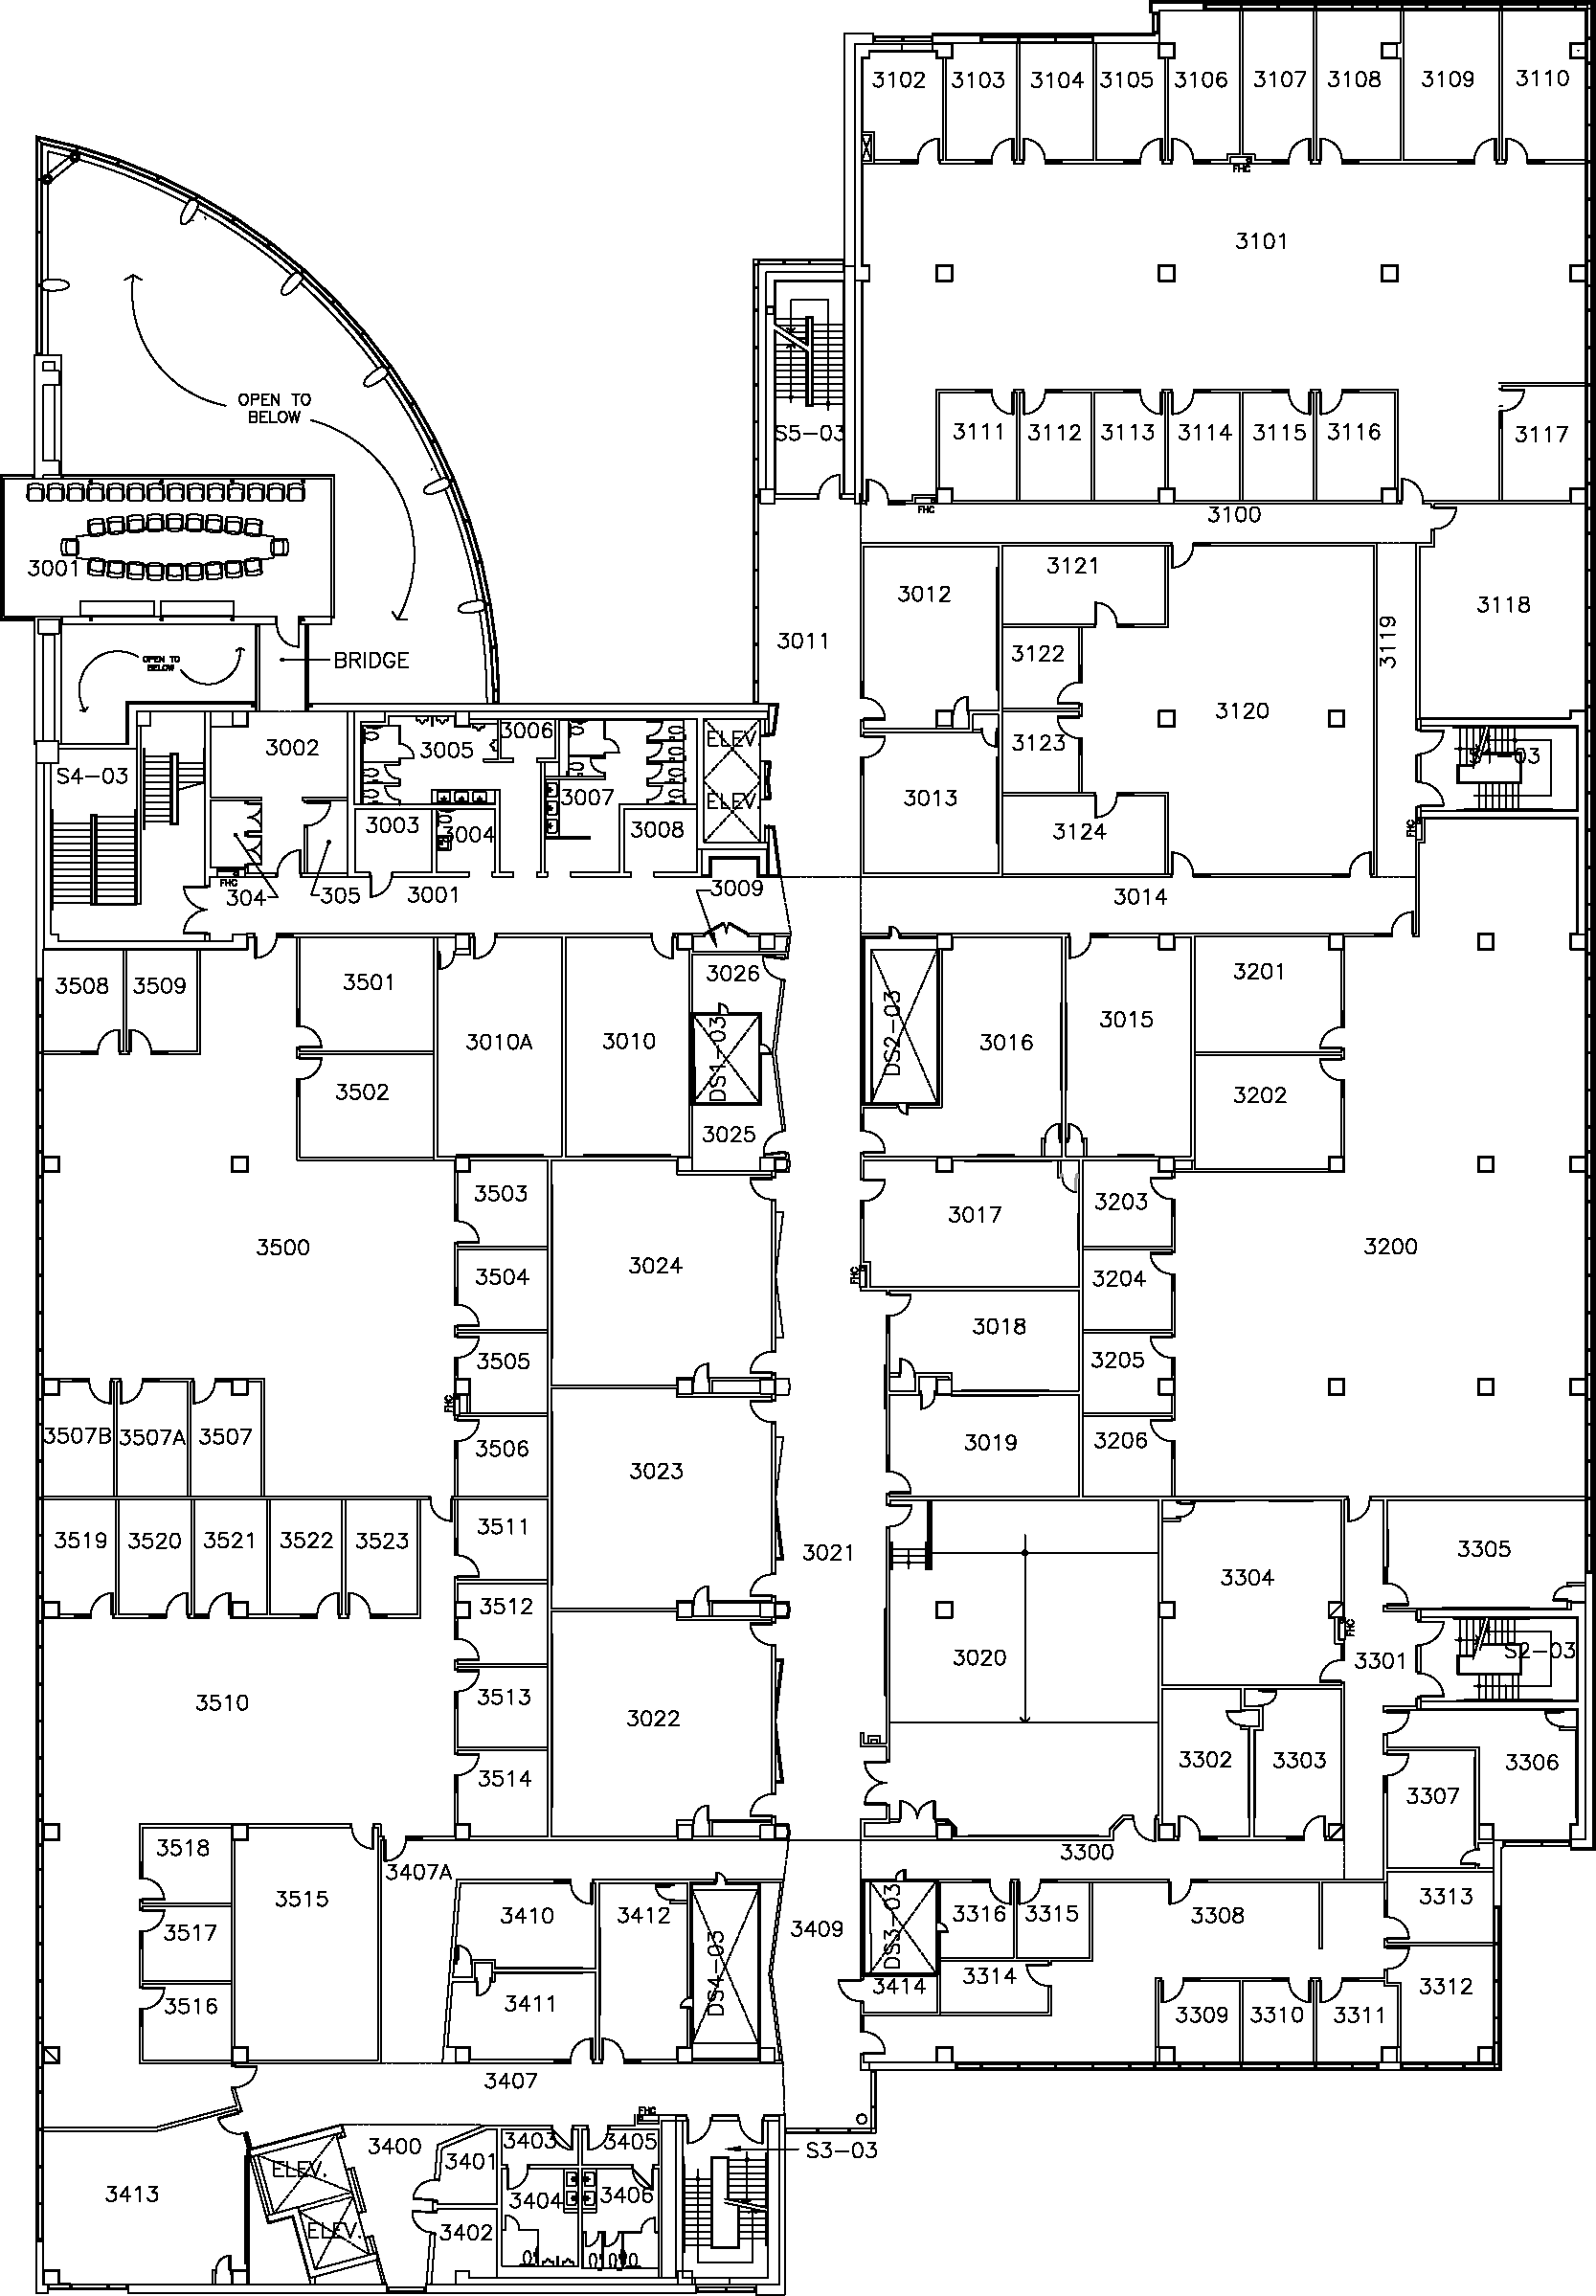 Michael DeGroote Centre for Learning and Discovery (MDCL) - Third Floor Map